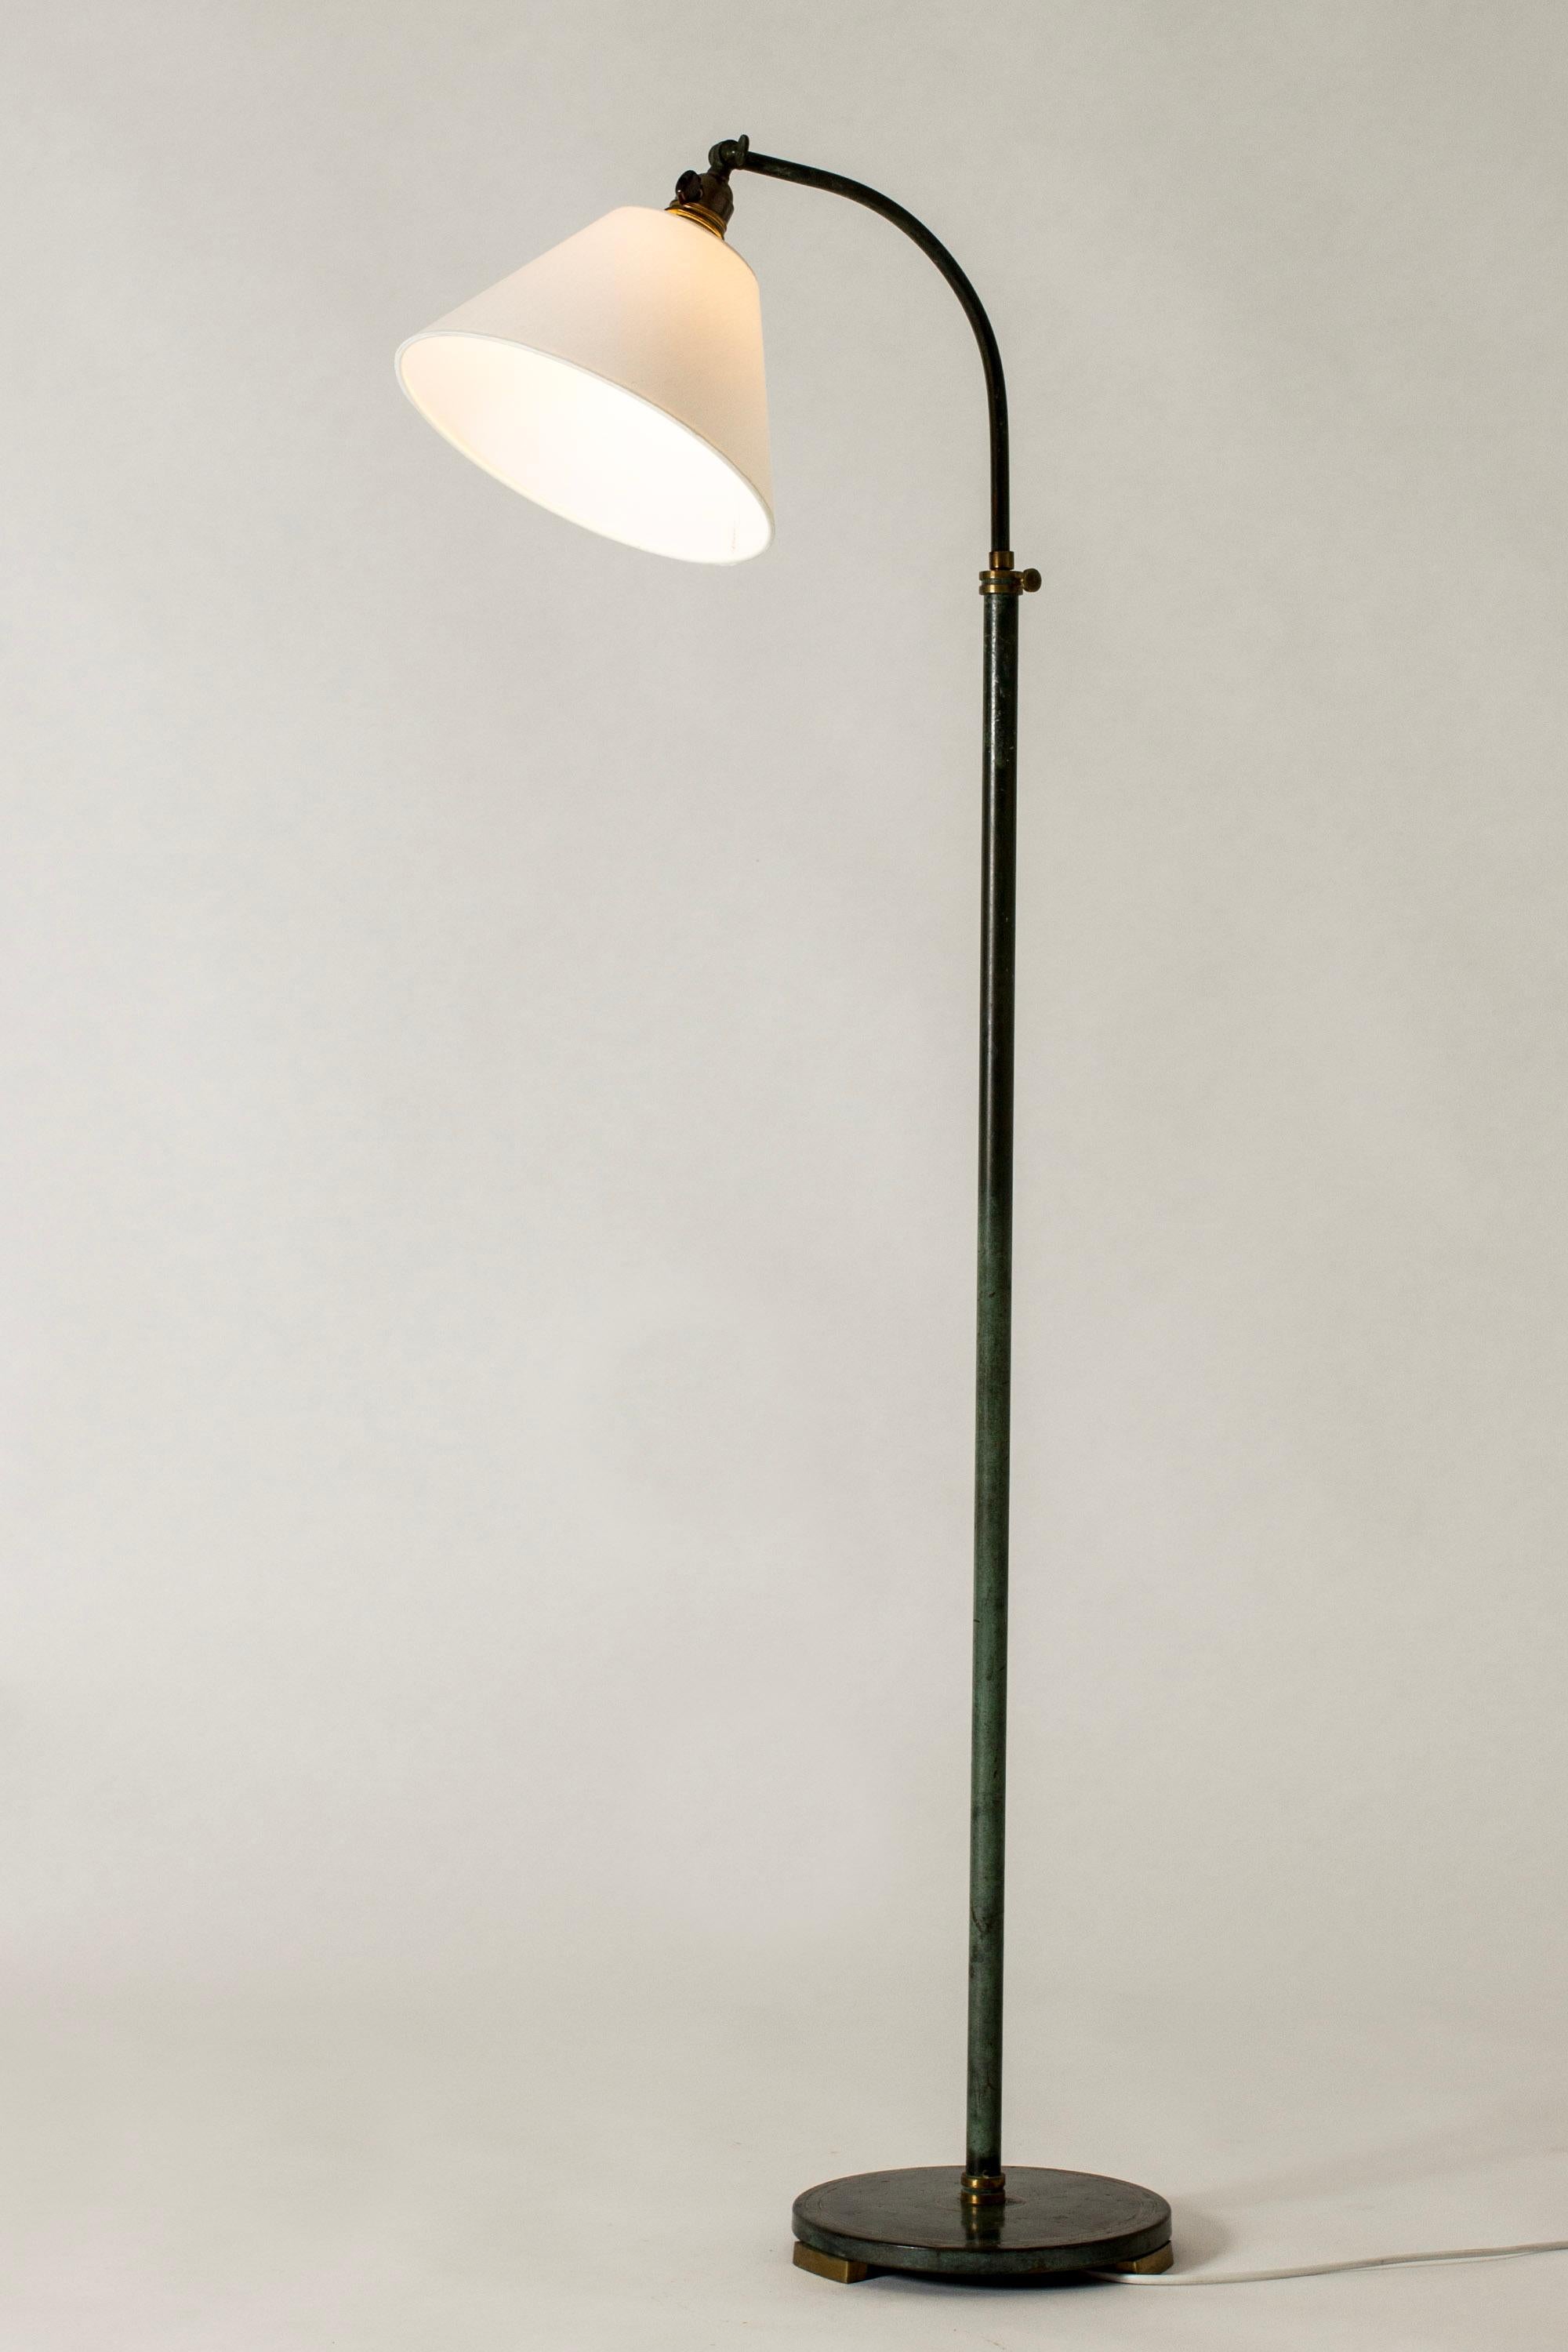 Elegant Swedish Art Deco floor lamp, made from bronze with deep green patina. Burnished gold details and decor. Height is adjustable.